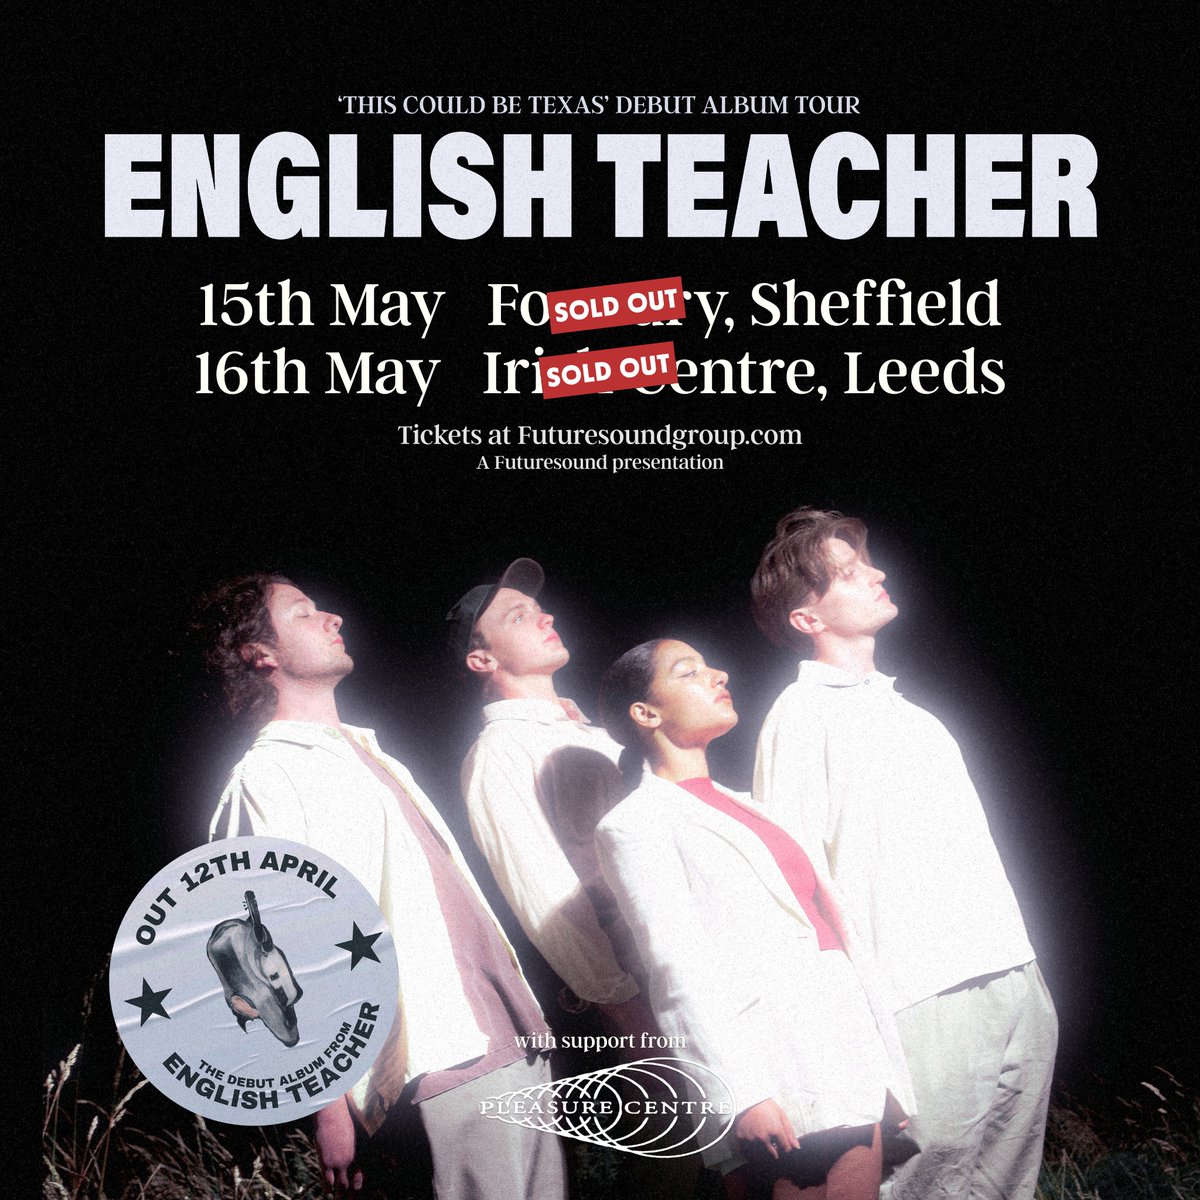 Alt/art rock quintet from the North Yorkshire coast, @pleasurecentre_ join @Englishteac_her on both of their SOLD OUT dates at @Foundrysu Sheffield & @LdsIrishCentre this May!